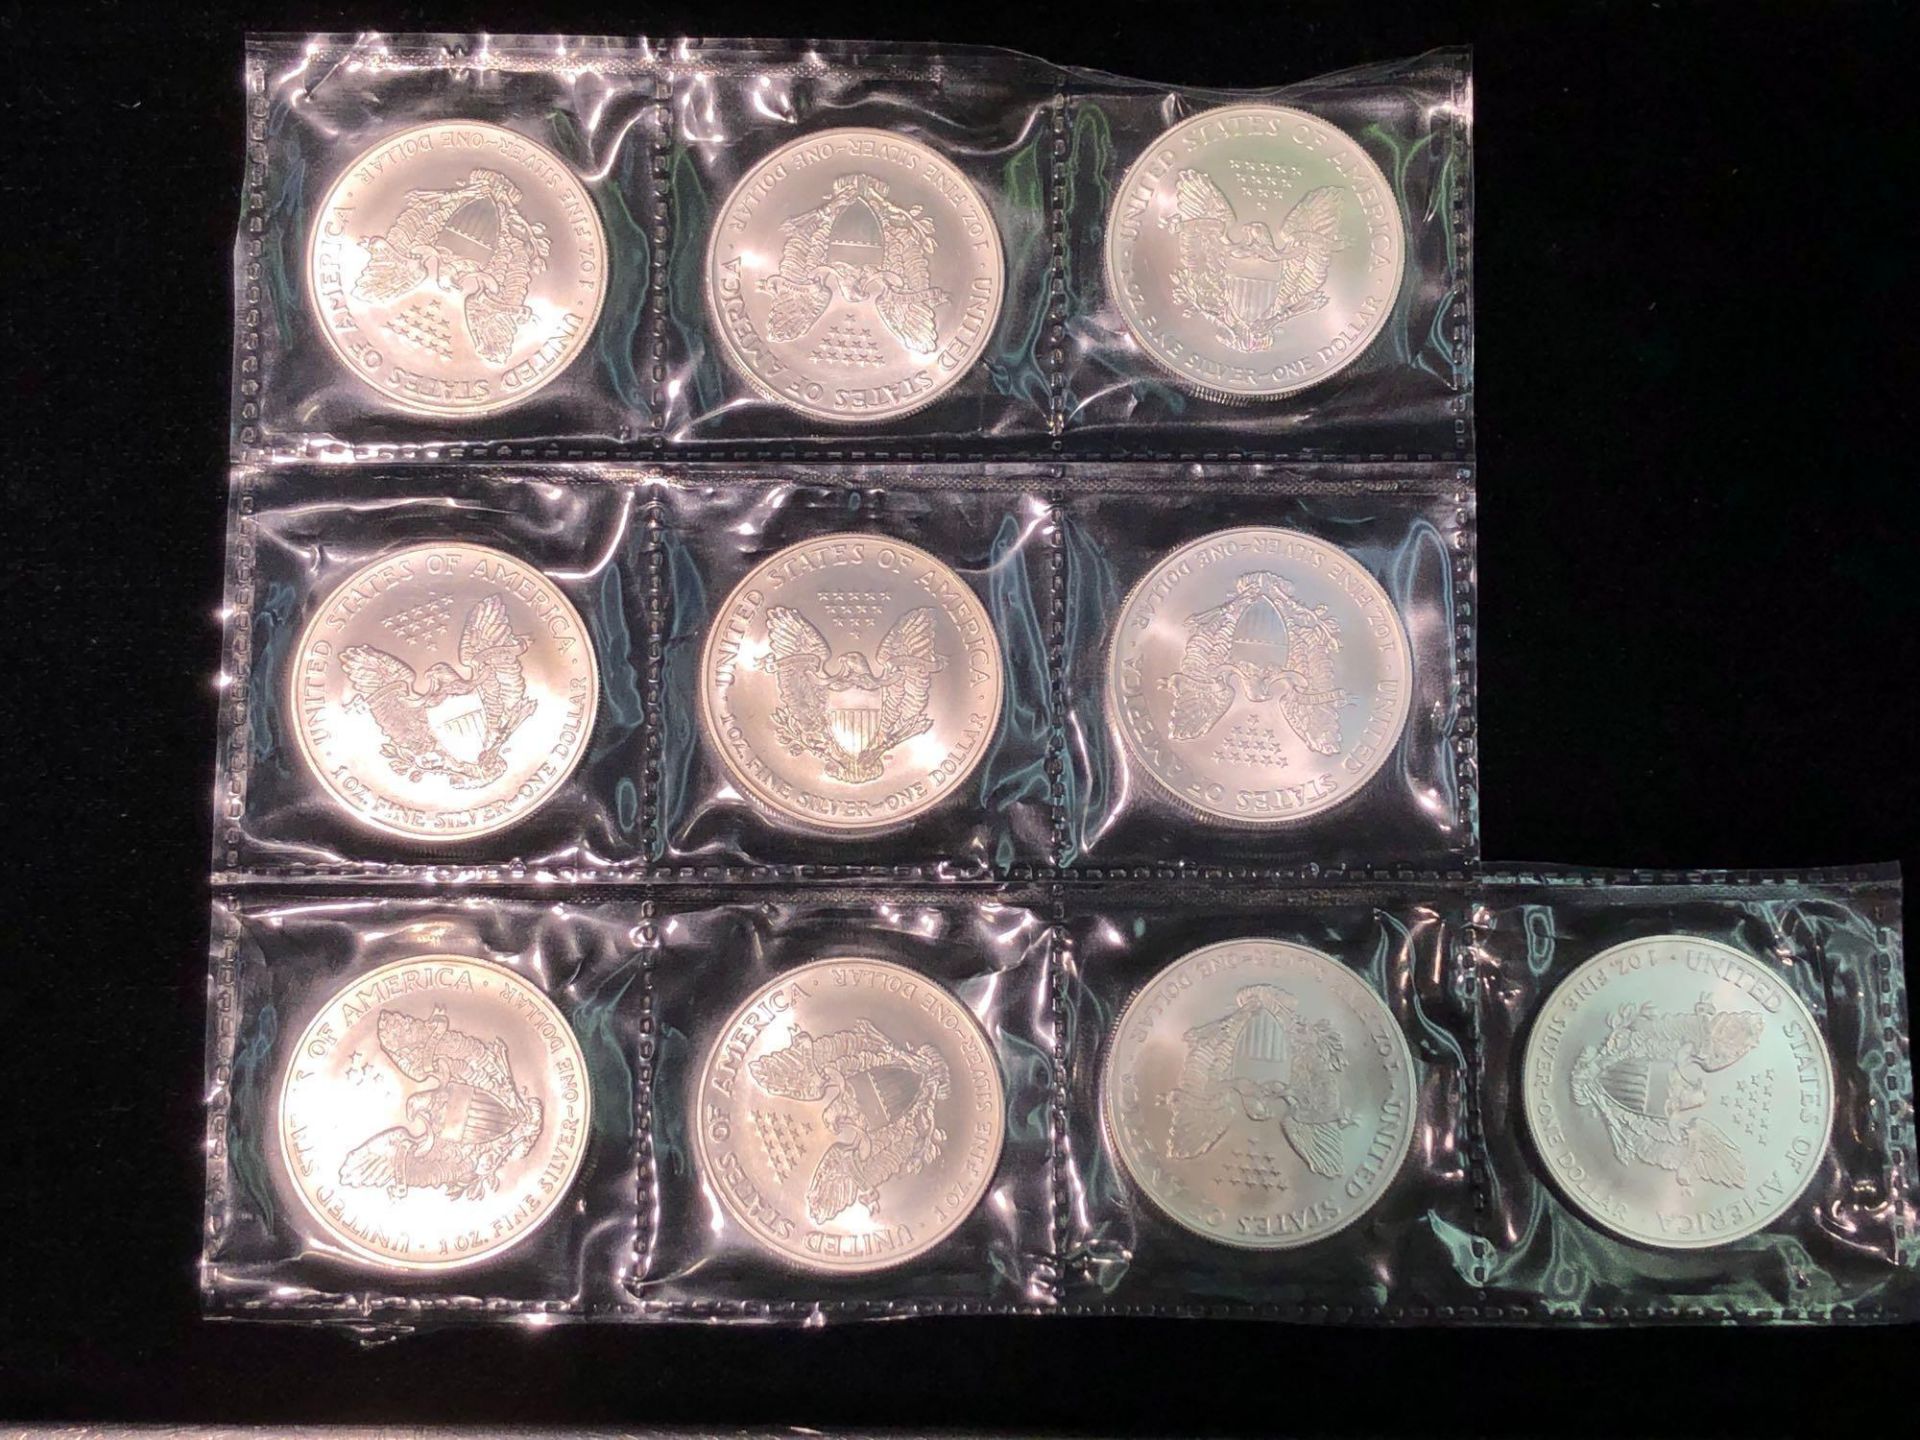 LOT OF 9 2004 AMERICAN EAGLE 1 OZT SILVER COINS SEALED IN PLASTIC - Bild 3 aus 8